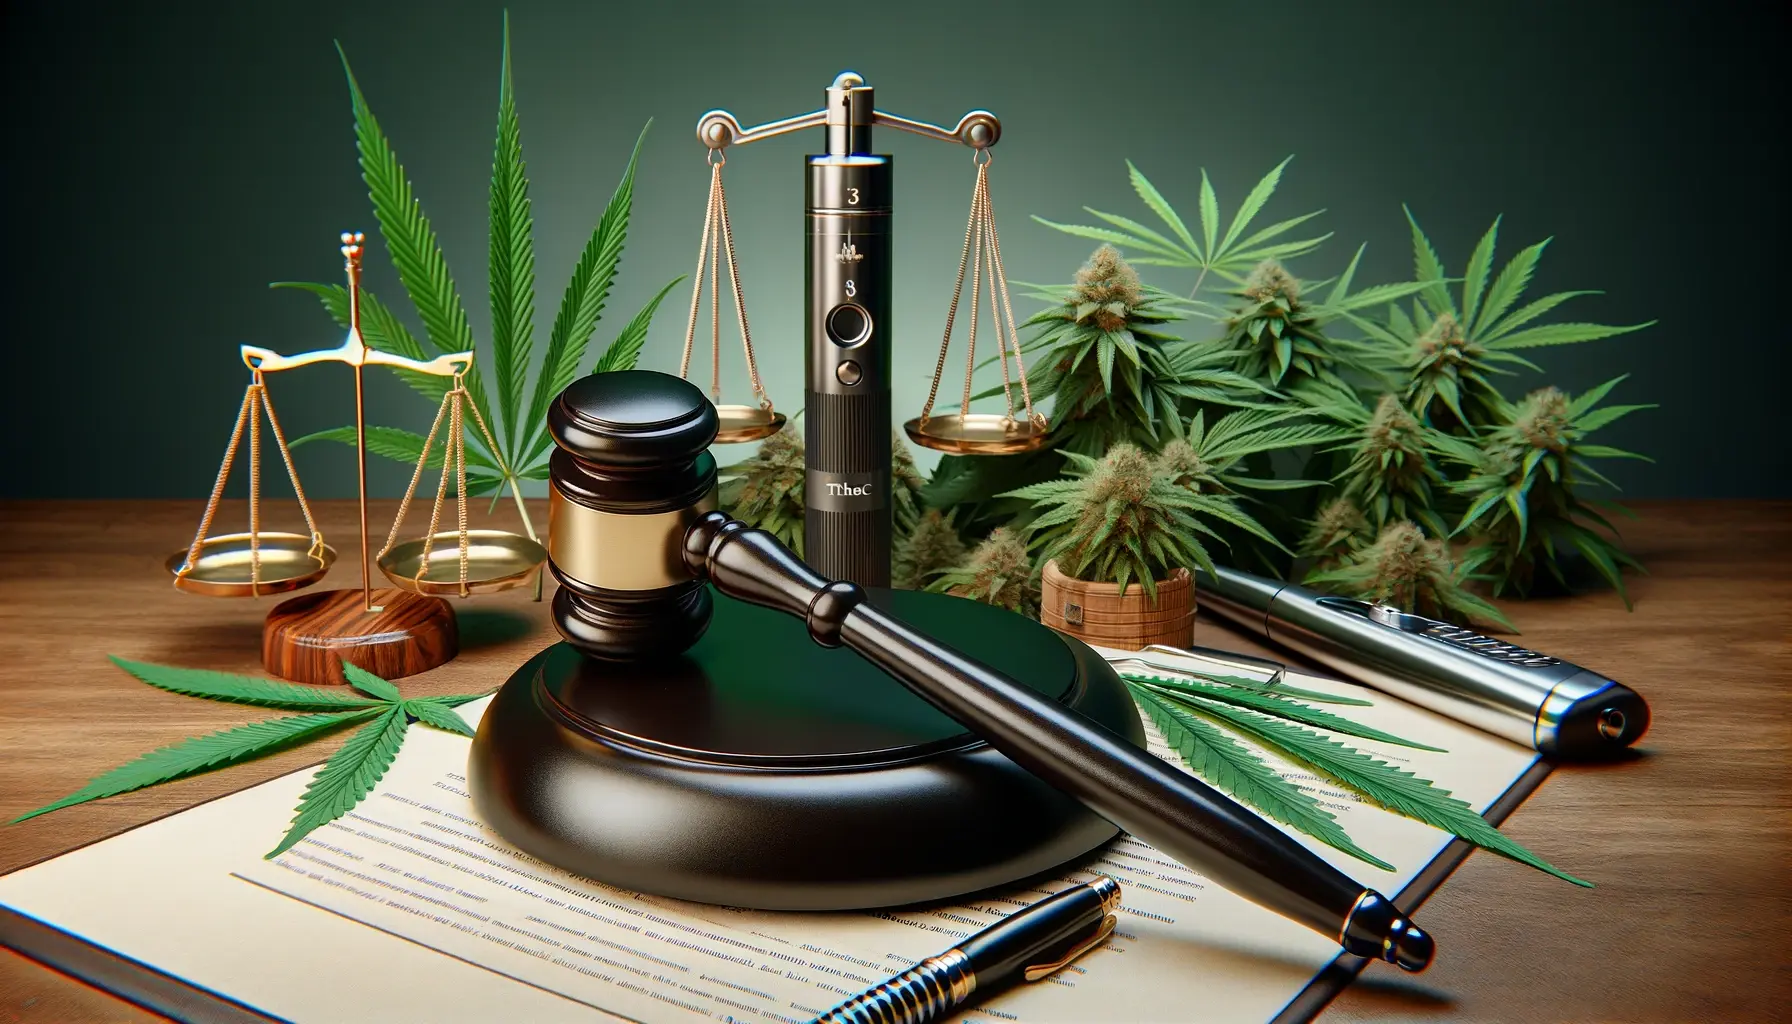 A conceptual image representing the legality of Delta 8 THC pens, featuring hemp plants, legal scales, and a gavel, with a background of a legal document and a vape pen. The image should convey a sense of legal ambiguity and the complexity of cannabis laws. The style should be realistic and informative, suitable for a blog post header.